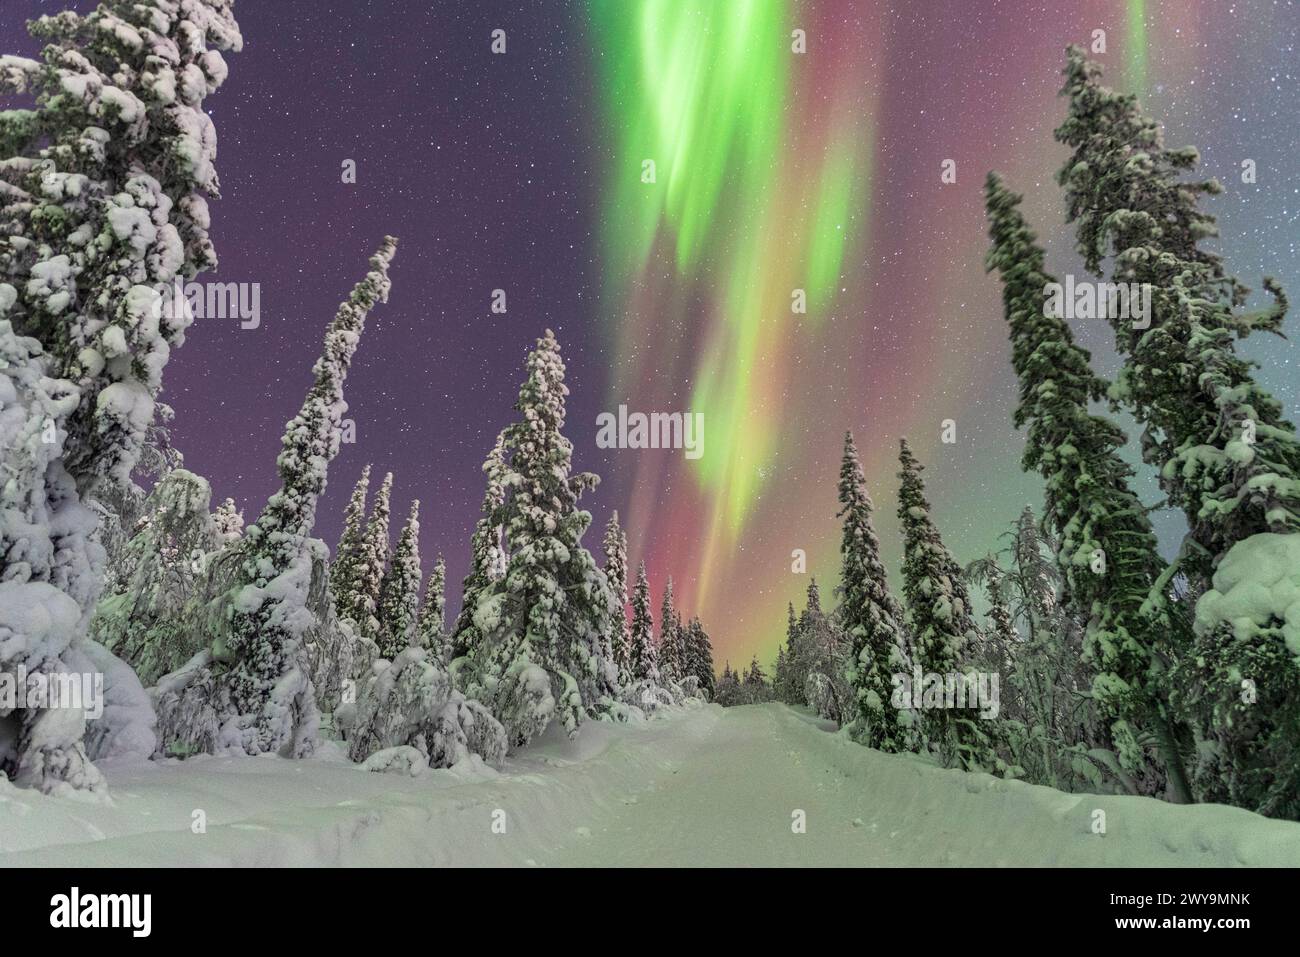 Northern Lights Aurora Borealis dancing in the starry night sky above the frozen forest, Tjautjas, Gallivare municipality, Norrbotten county, Swedish Stock Photo